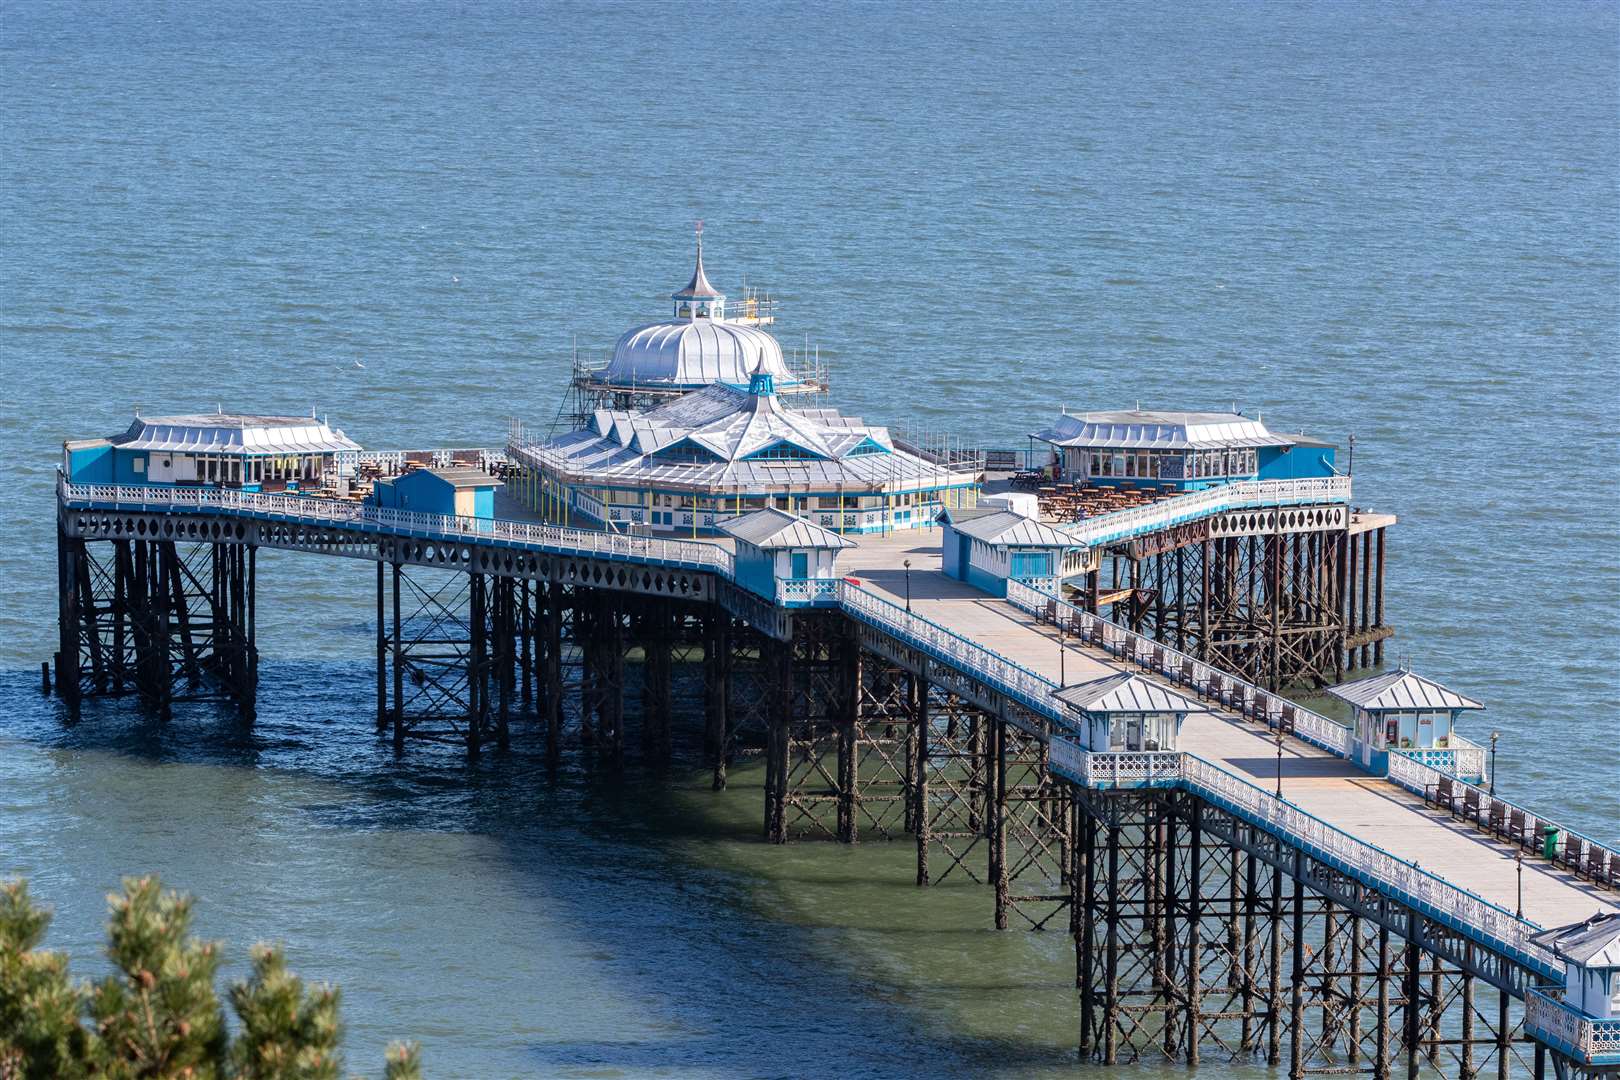 The pier at Llandudno, north Wales, stands empty as the UK continued in lockdown to help curb the spread of the coronavirus (Peter Byrne/PA)